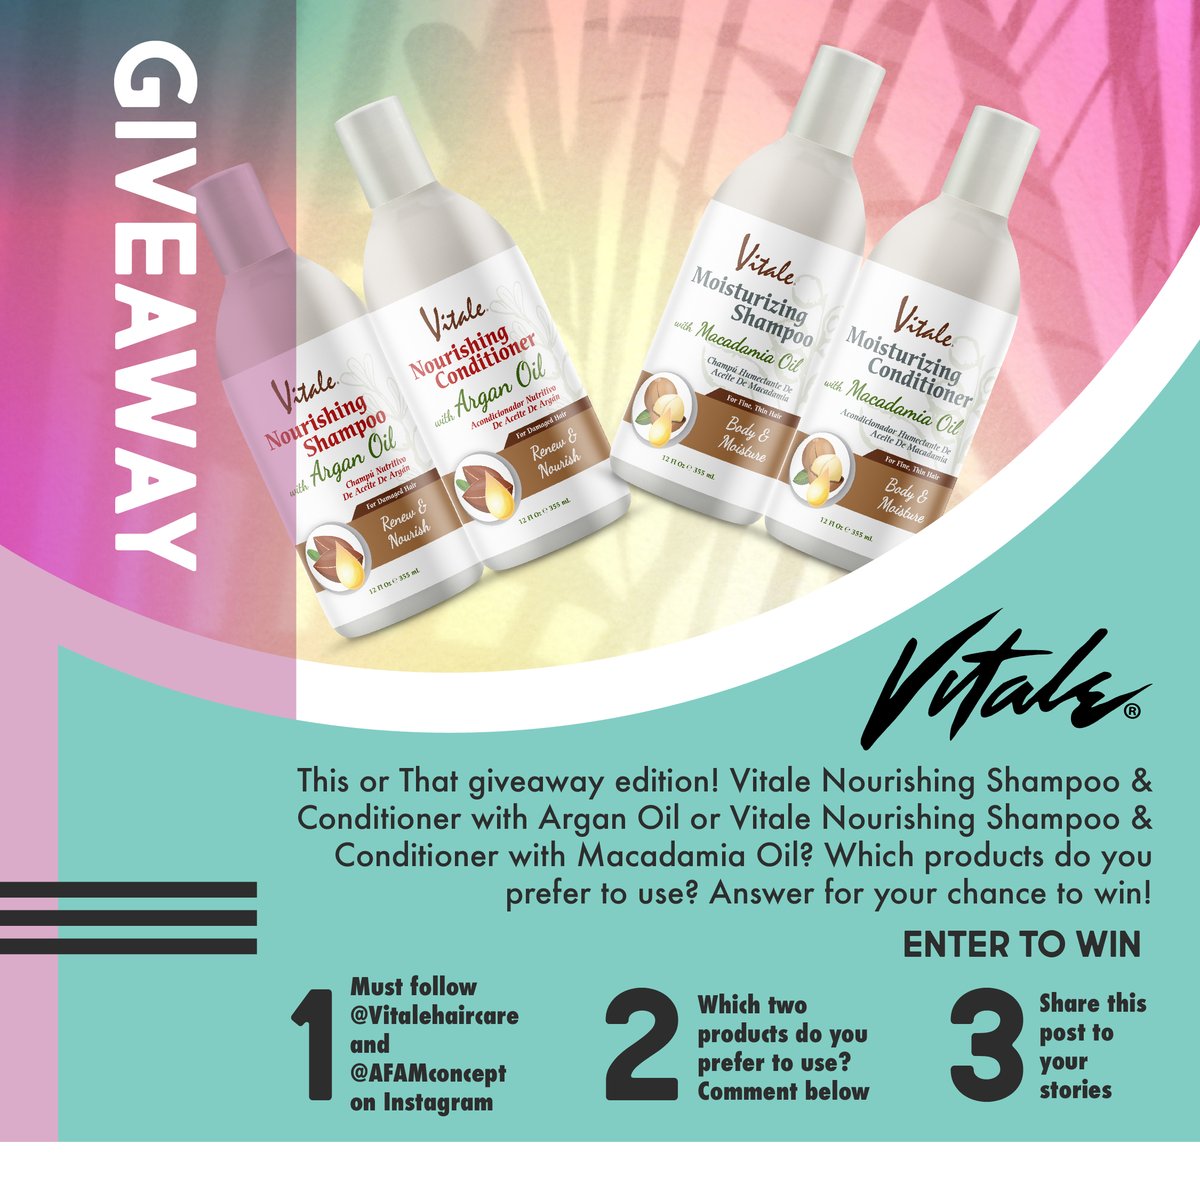 Does Macadamia Oil or Argan Oil work better for your hair? Here’s your chance to win those products! No giveaway pages.
.
.
#vitaleproducts #braids #braidsheen #protectivestyles #lockandtwistgel #beautyonabudget #braidingproducts #hairrelaxer #oliveoil #ghananaturals